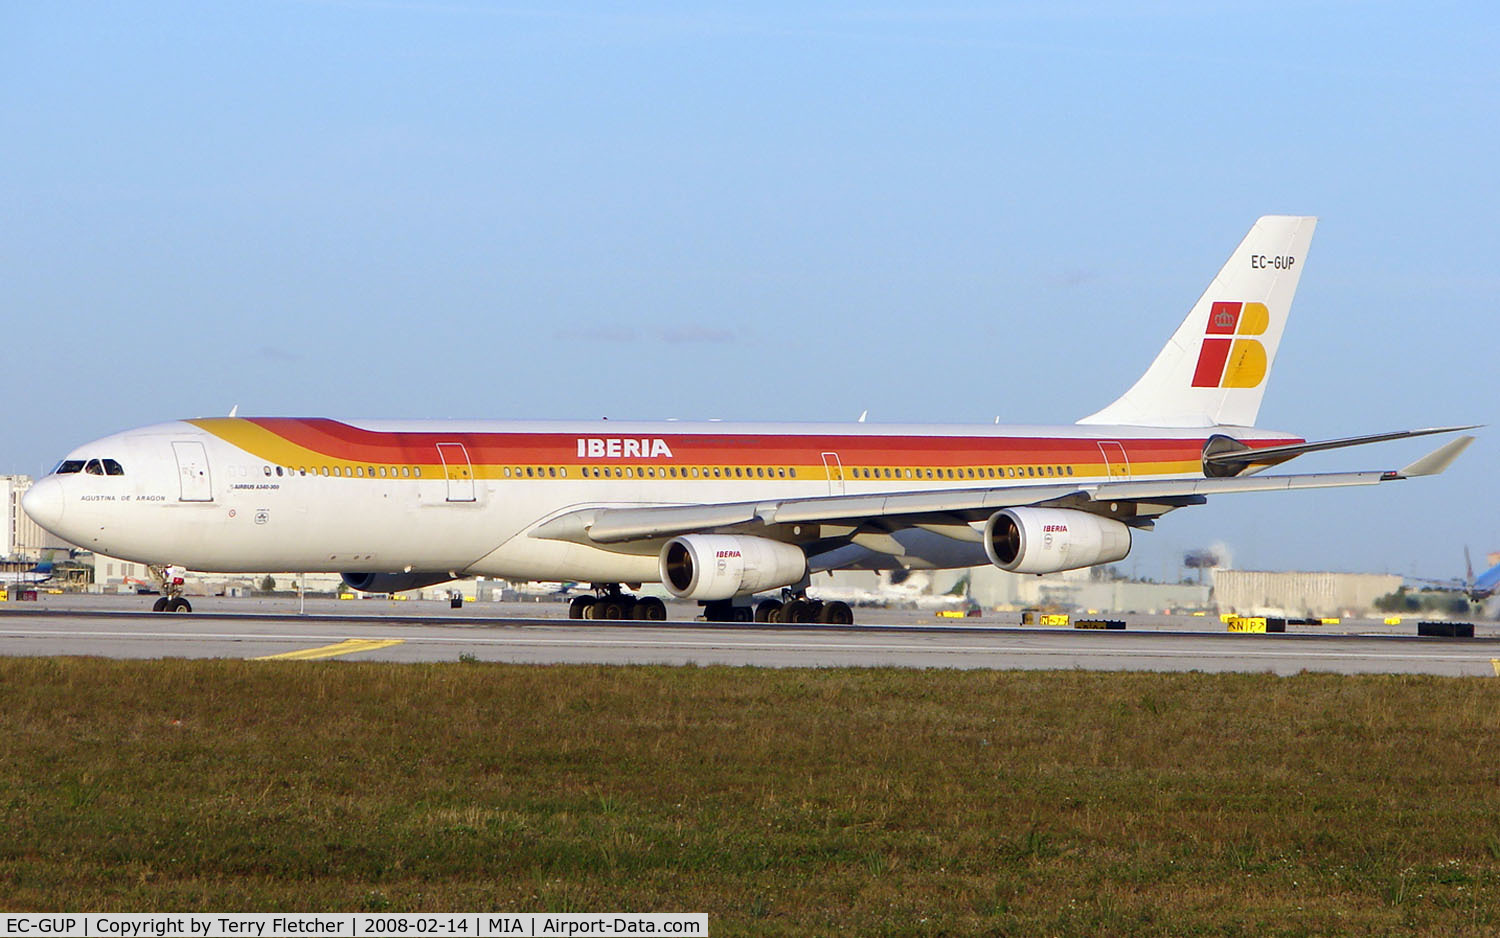 EC-GUP, 1998 Airbus A340-313X C/N 217, Iberia A340 about to depart Miami